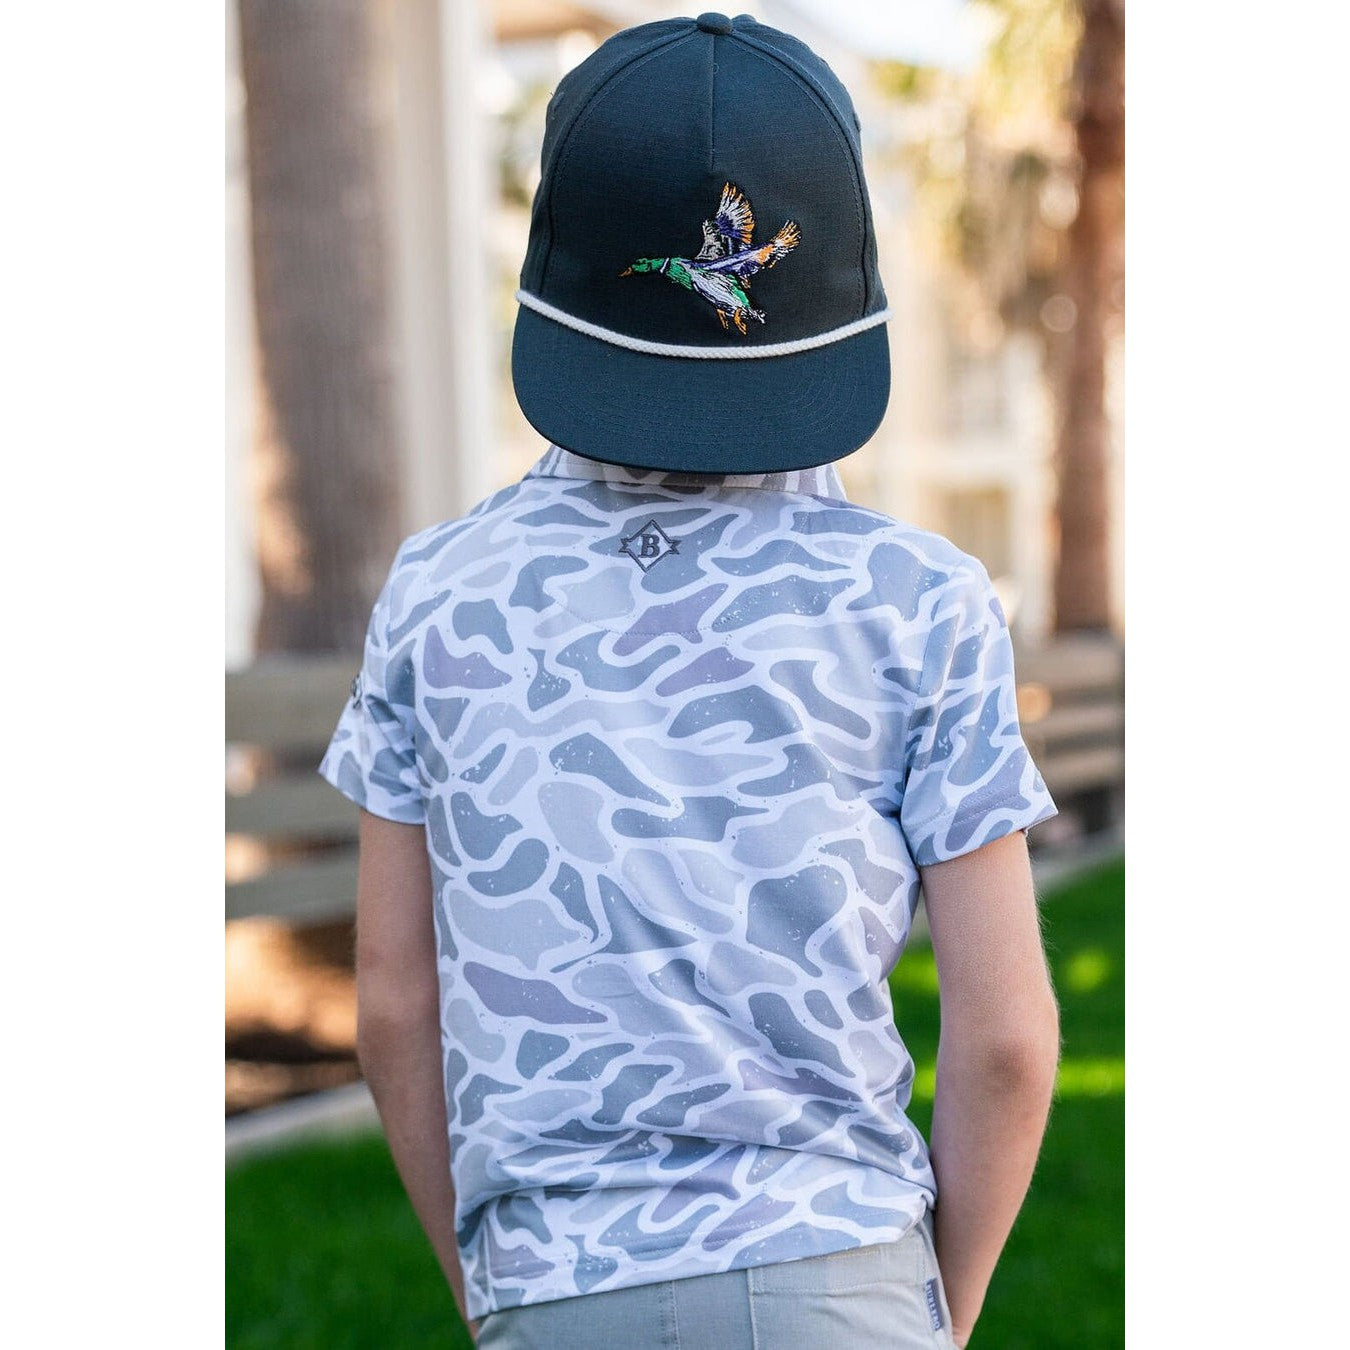 Burlebo Youth Performance Polo in White Camo